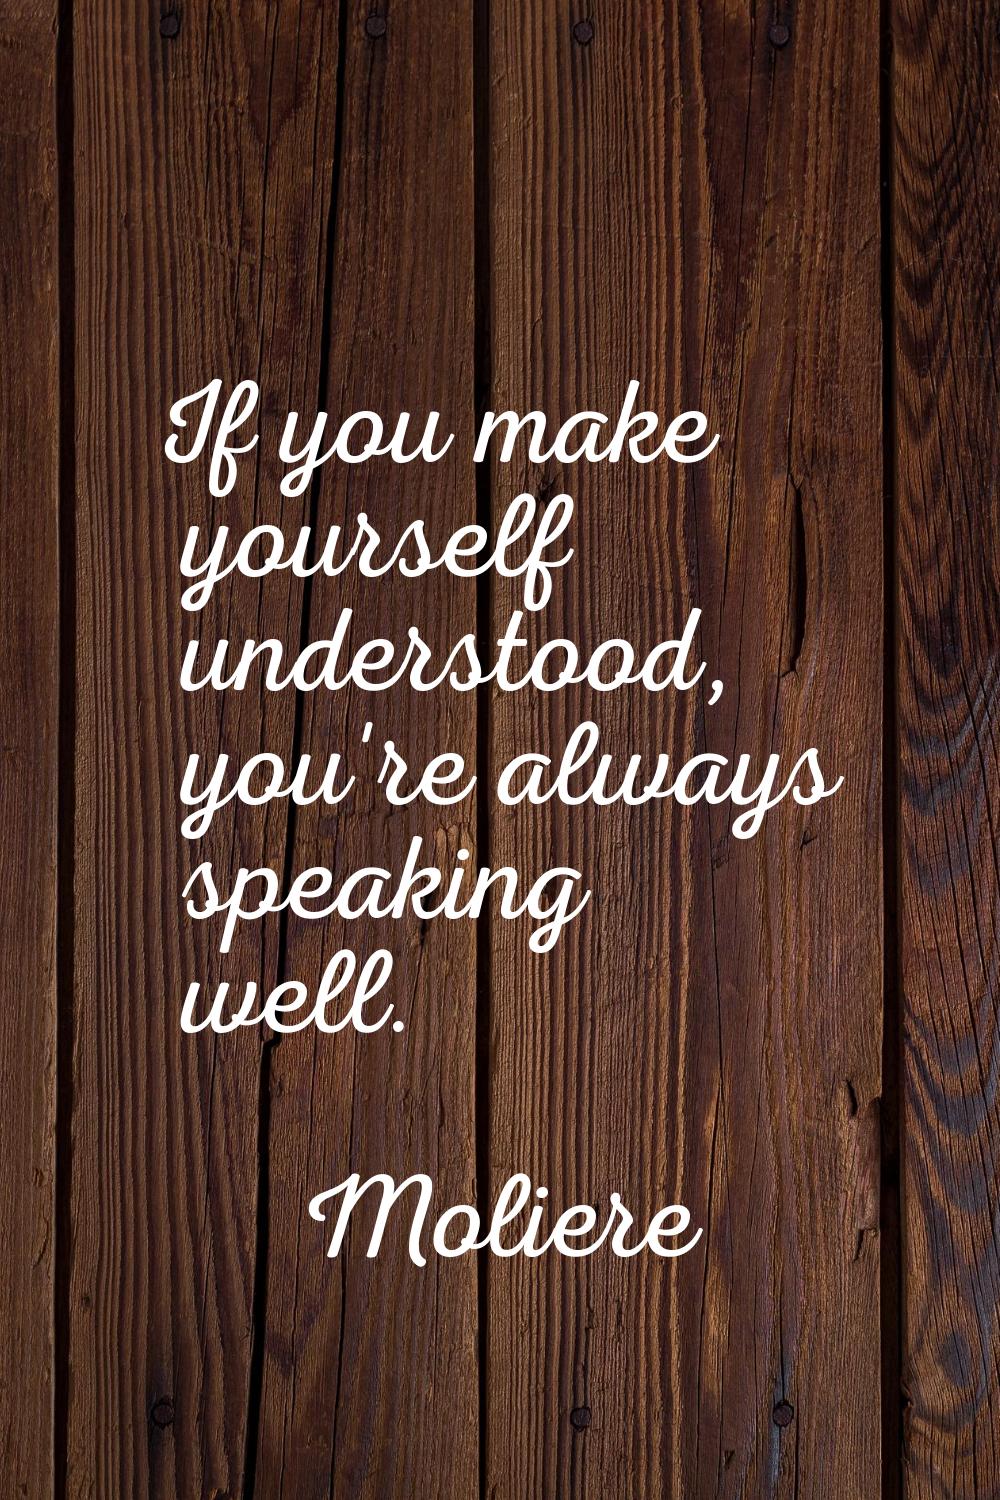 If you make yourself understood, you're always speaking well.